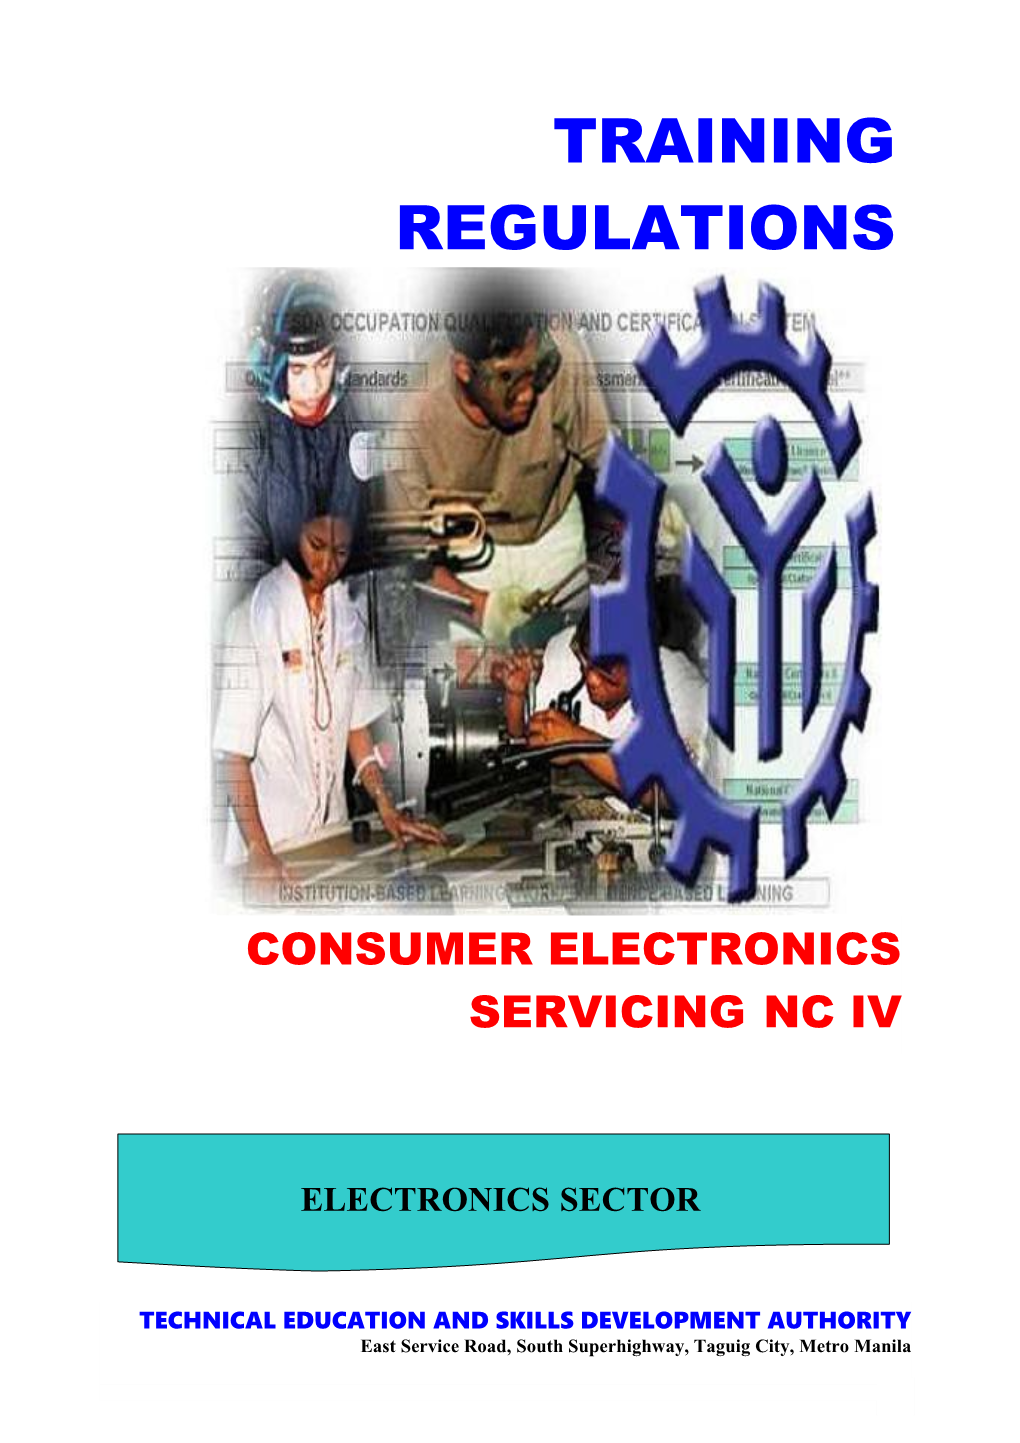 TRAINING REGULATIONS - CONSUMER ELECTRONICS SERVICING NC IV Page 1